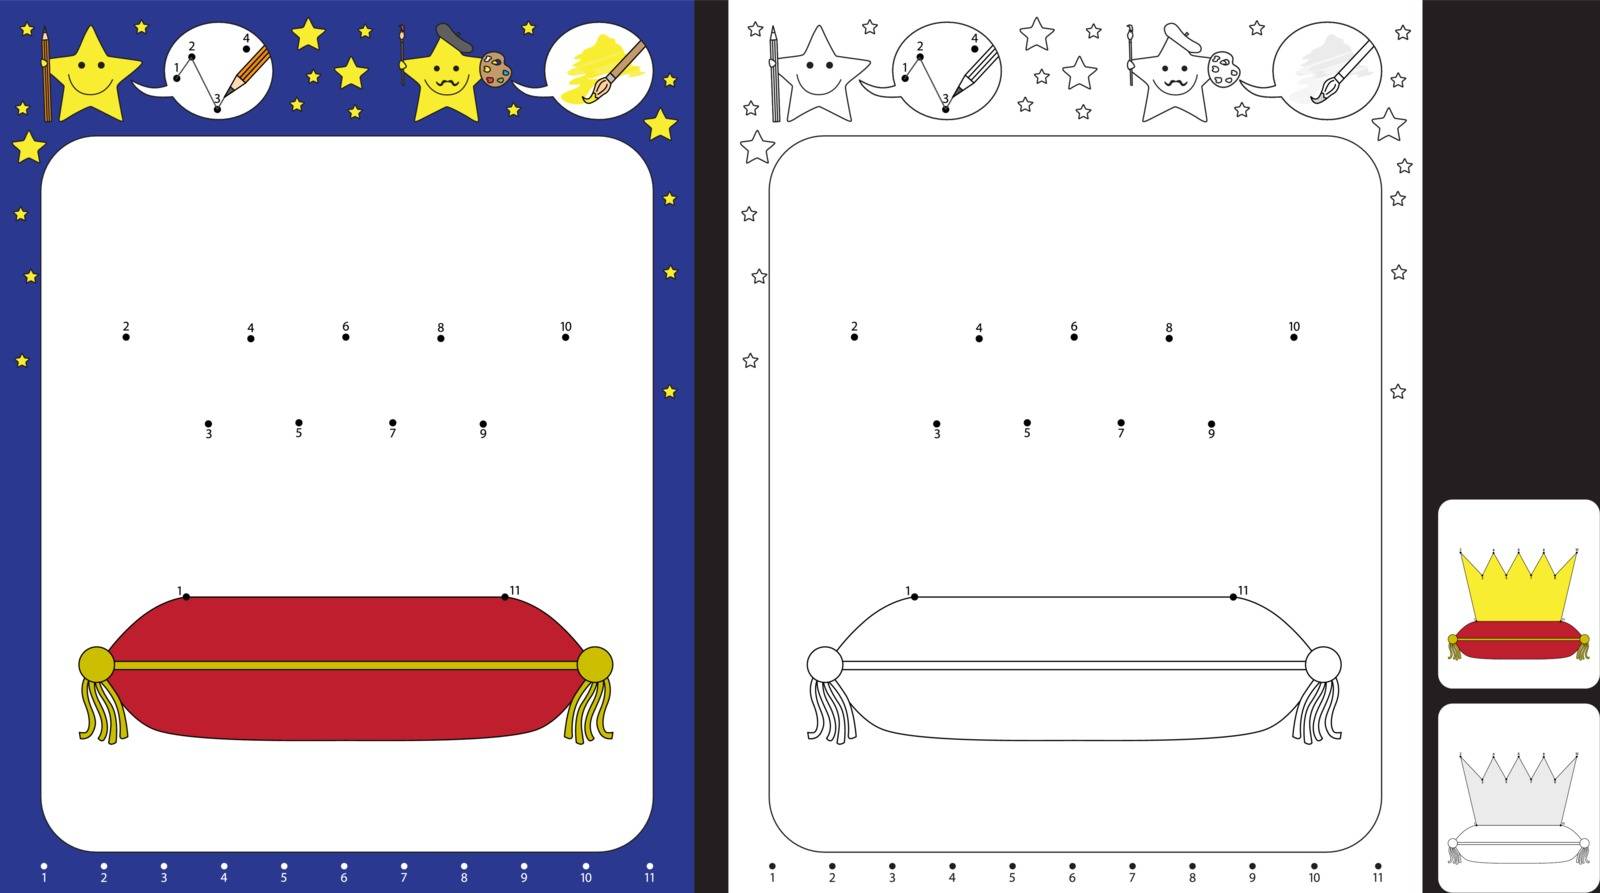 Preschool worksheet for practicing fine motor skills and recognising numbers - connecting dots by numbers to draw a crown